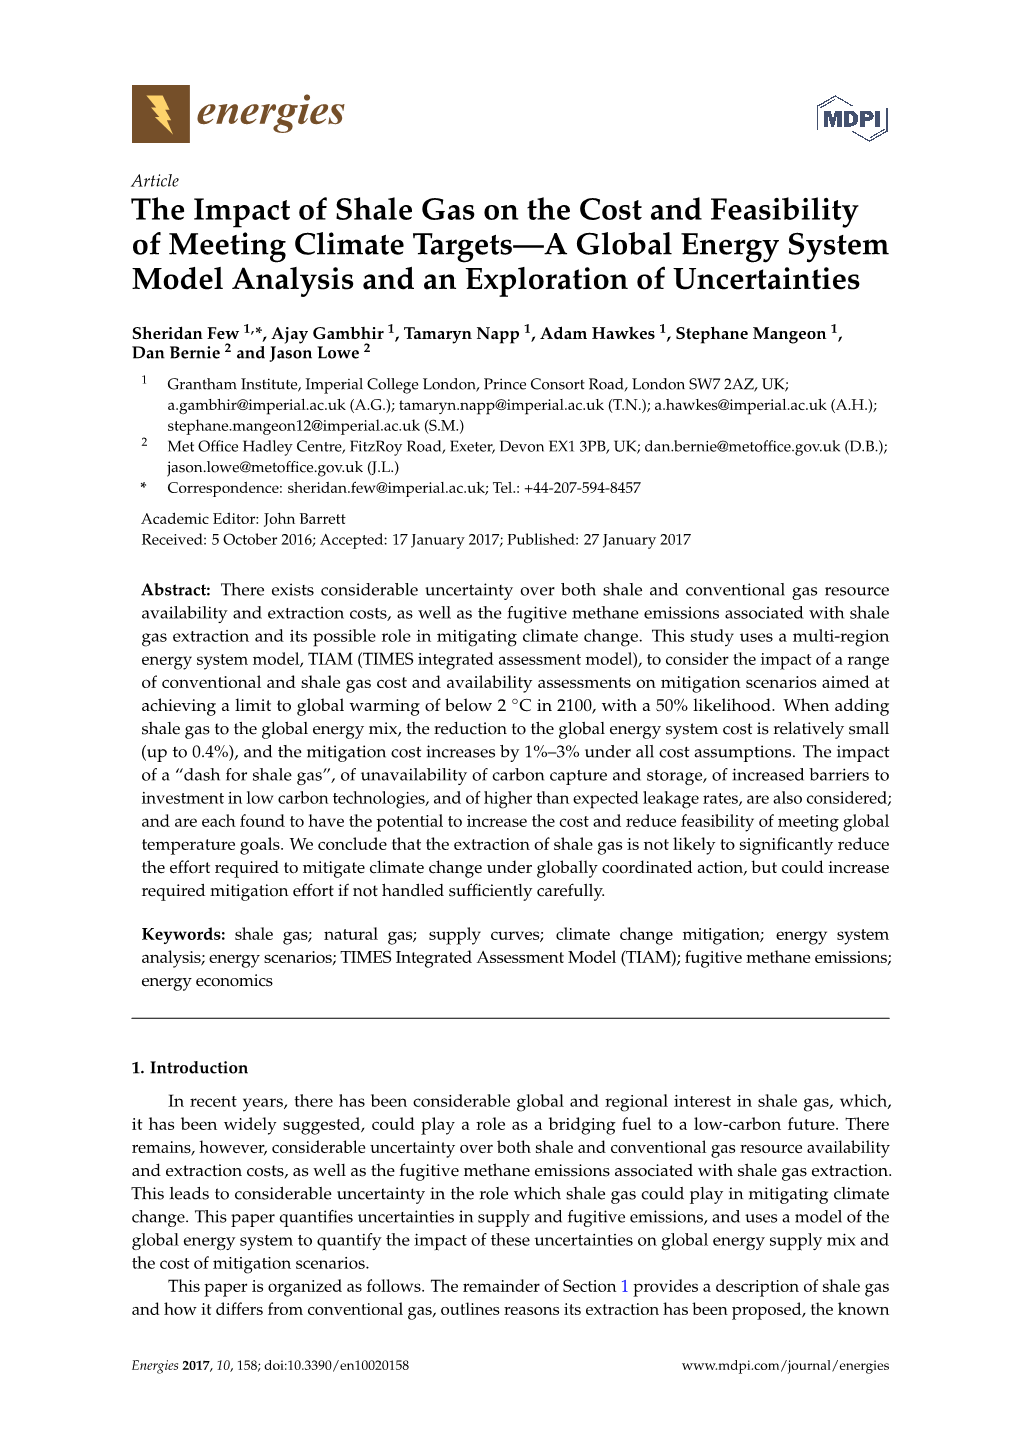 The Impact of Shale Gas on the Cost and Feasibility of Meeting Climate Targets—A Global Energy System Model Analysis and an Exploration of Uncertainties